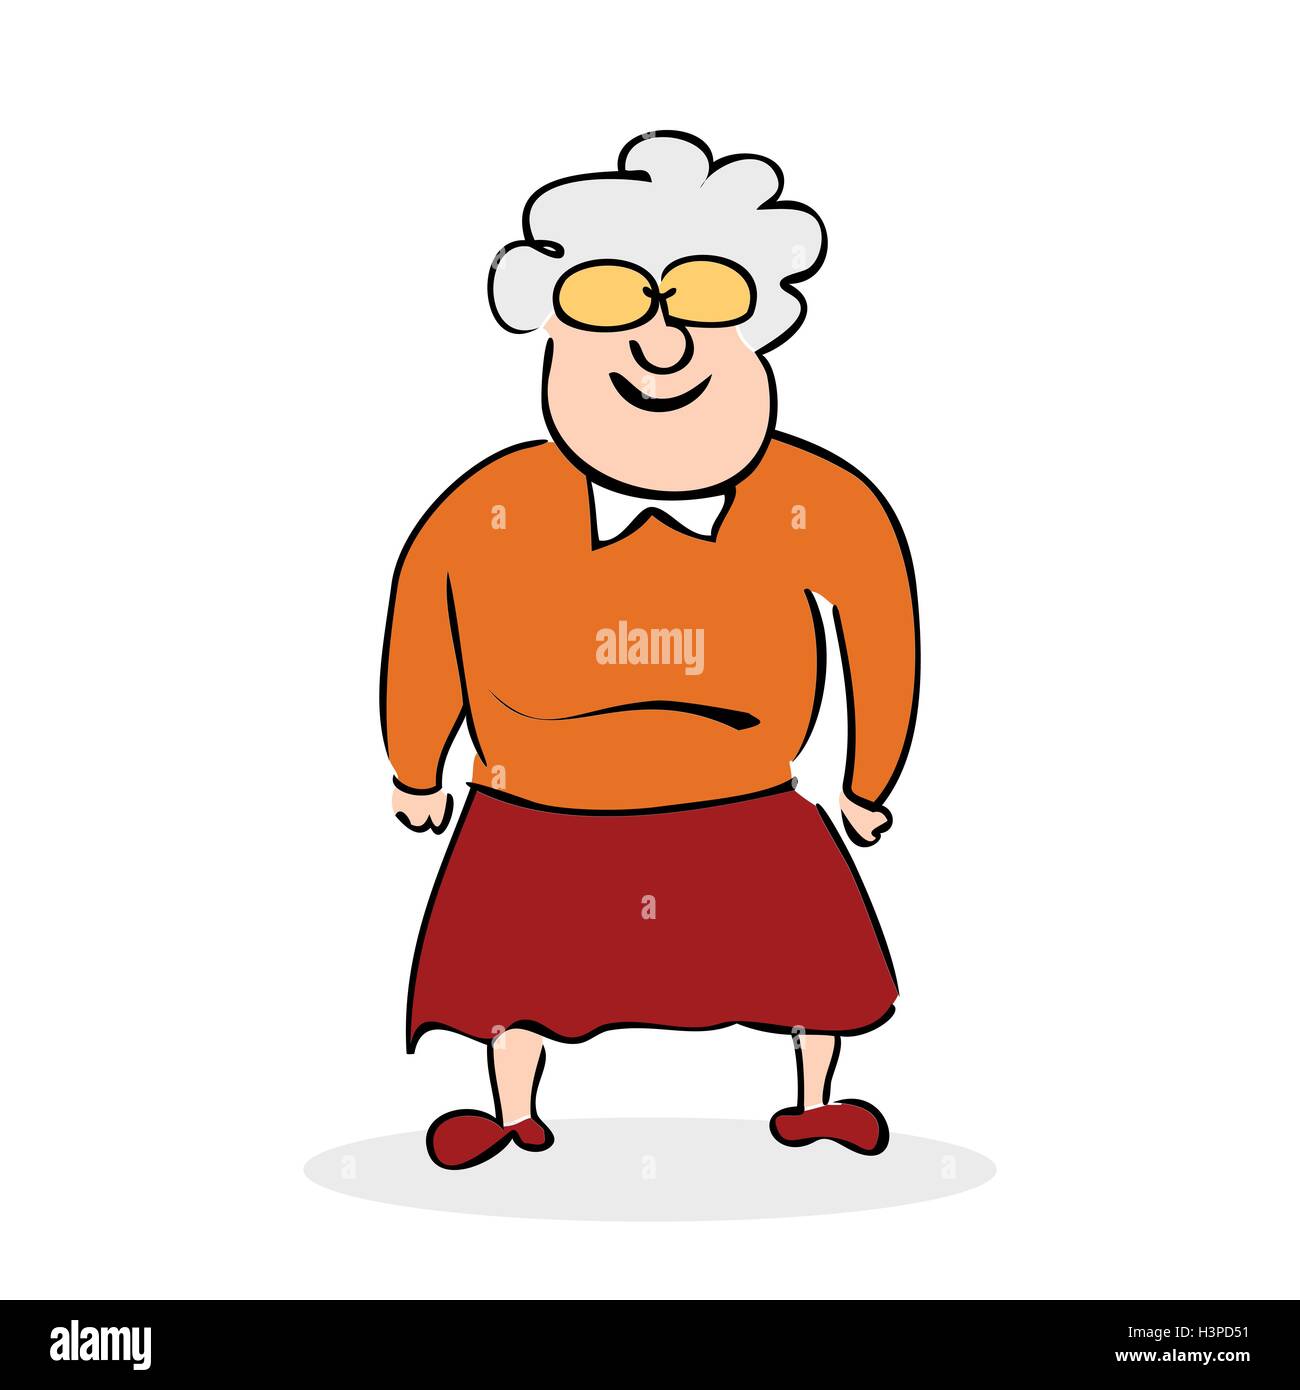 Funny elderly lady with glasses. Grandmother standing. Colorful cartoon vector illustration on white background Stock Vector